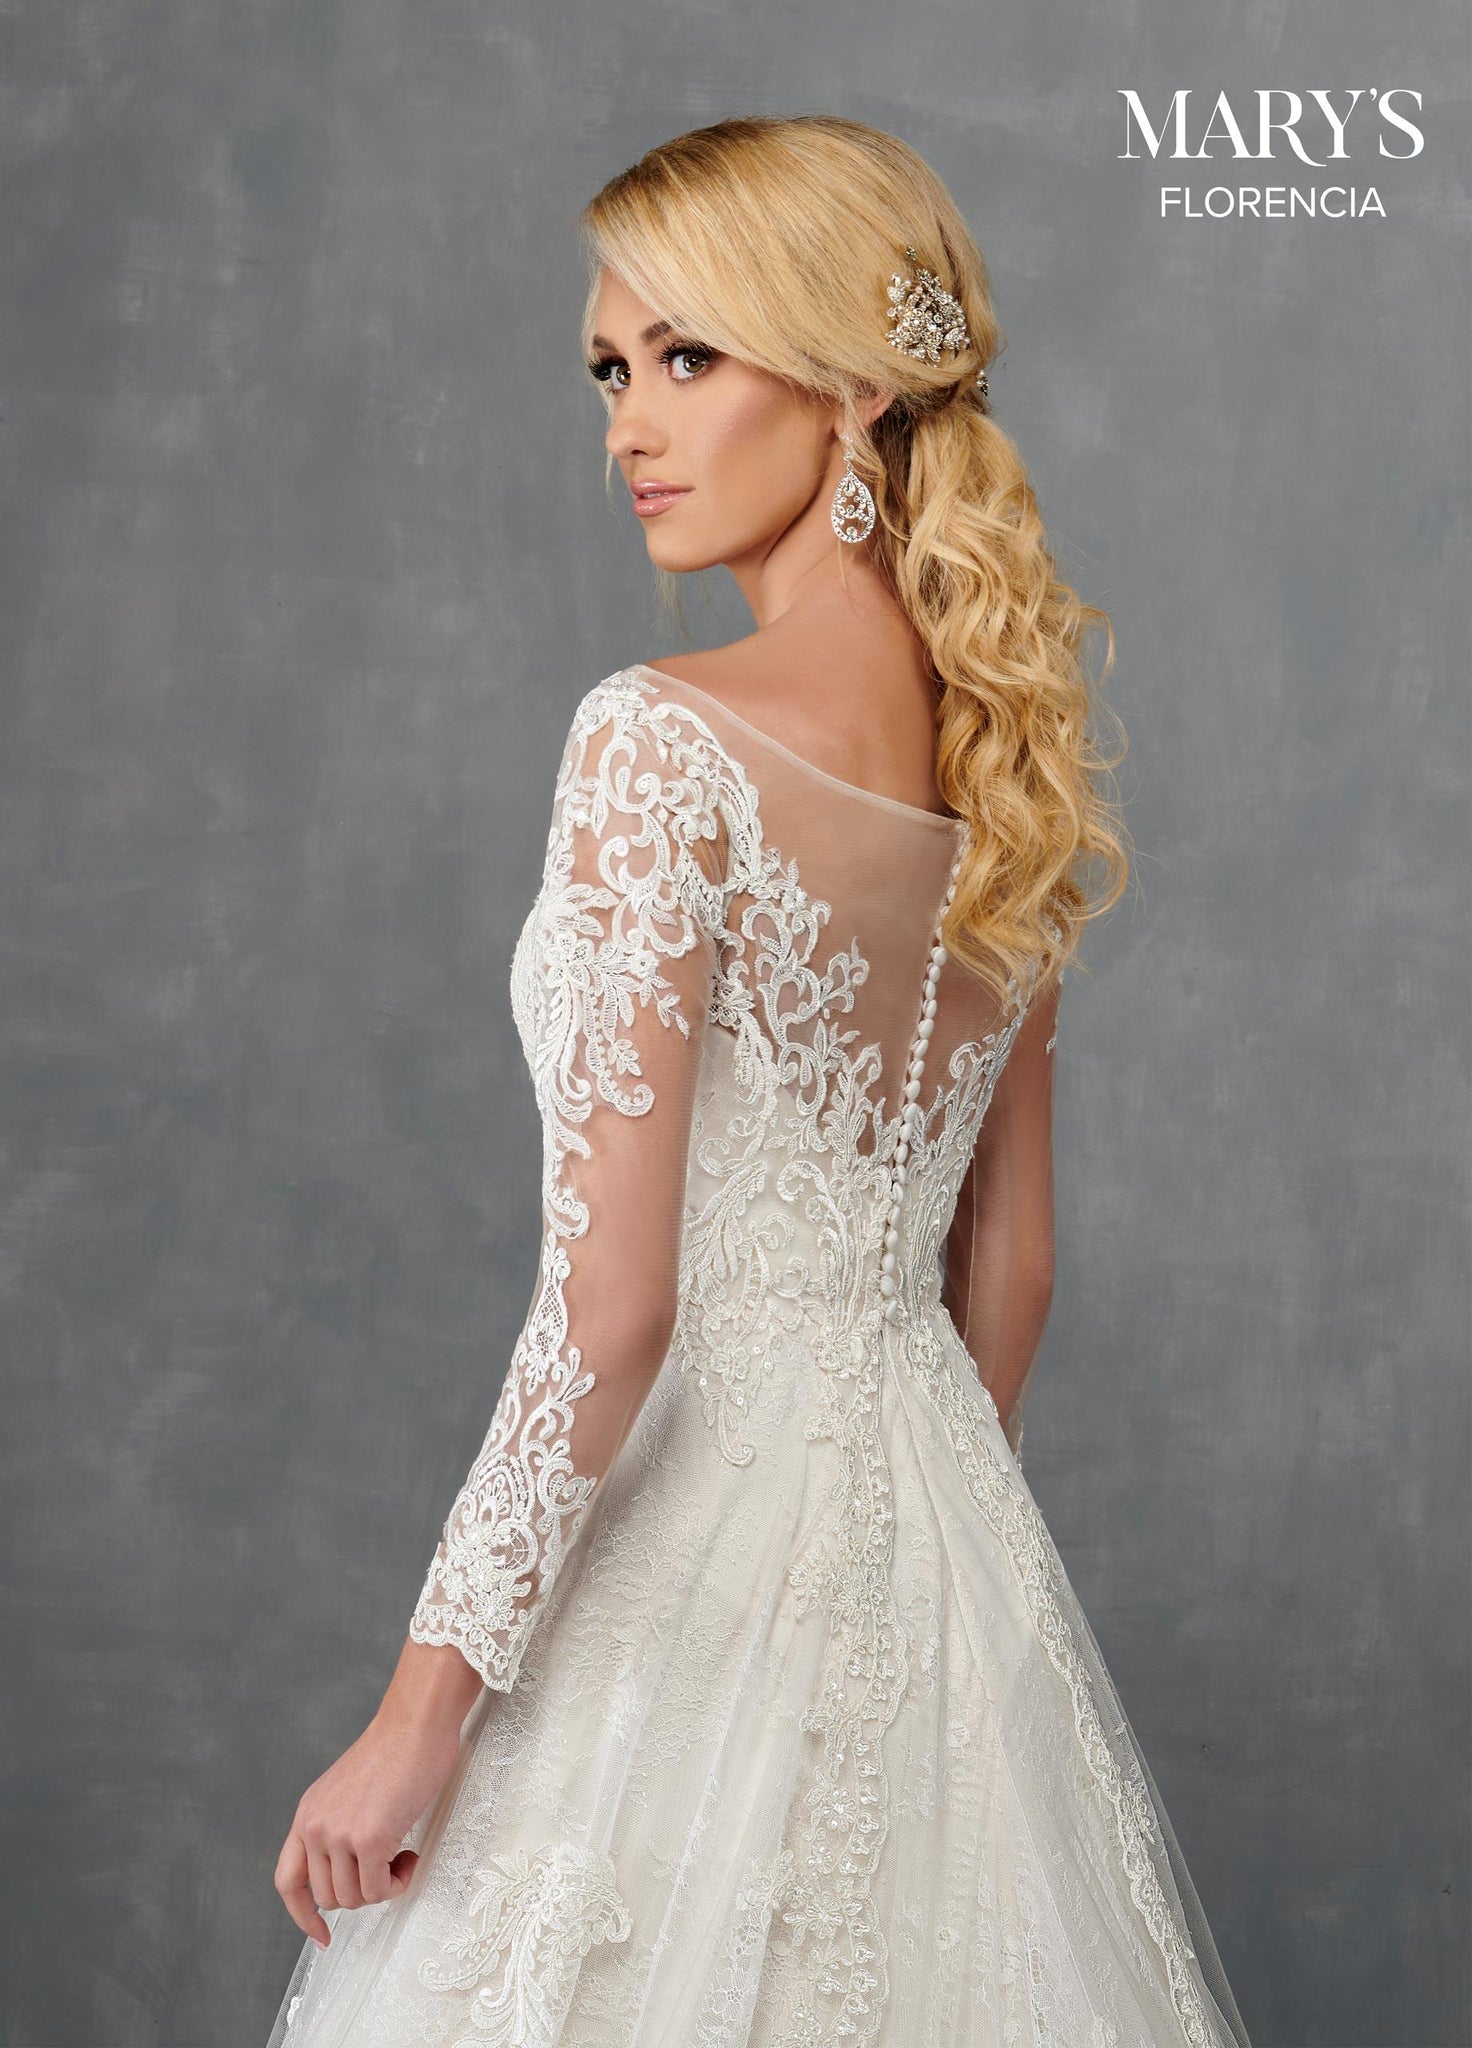 UK16 Hannah - Adore Bridal and Occasion Wear